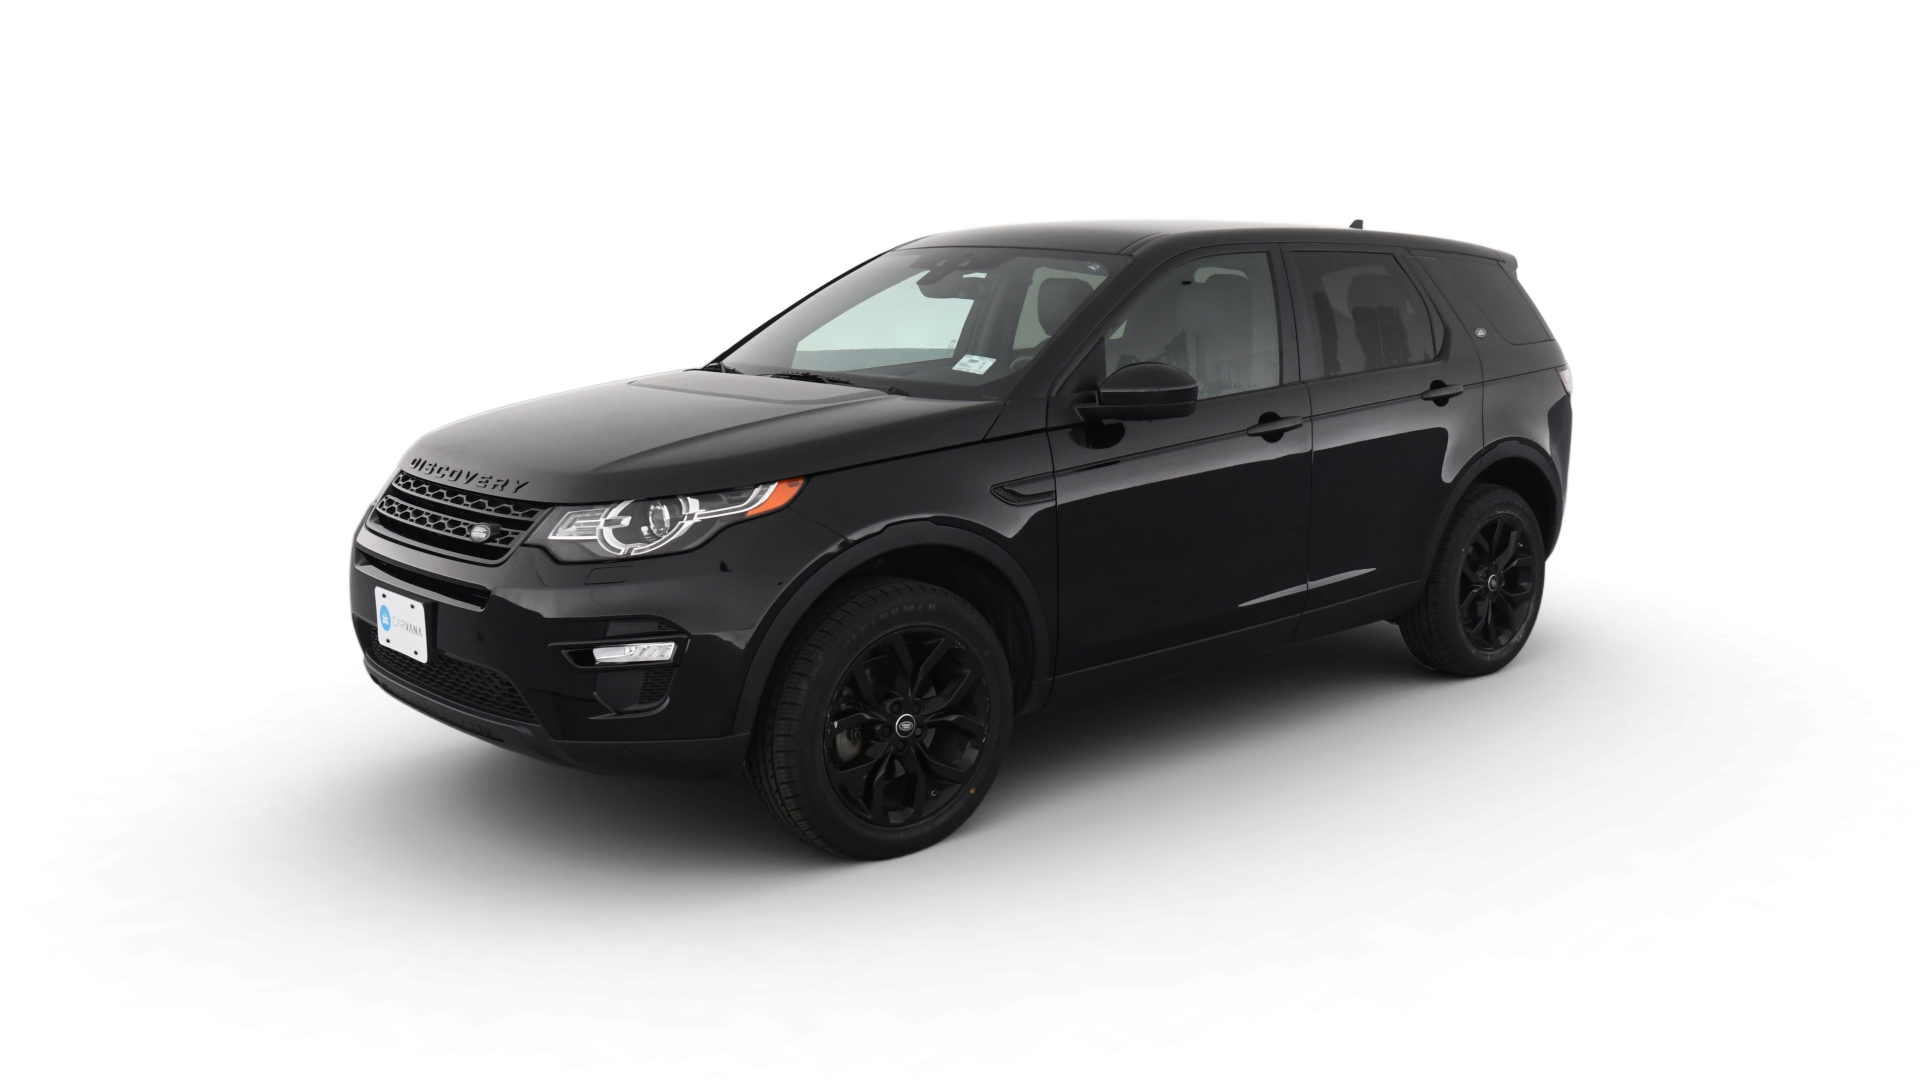 Land Rover Discovery Sport model image.